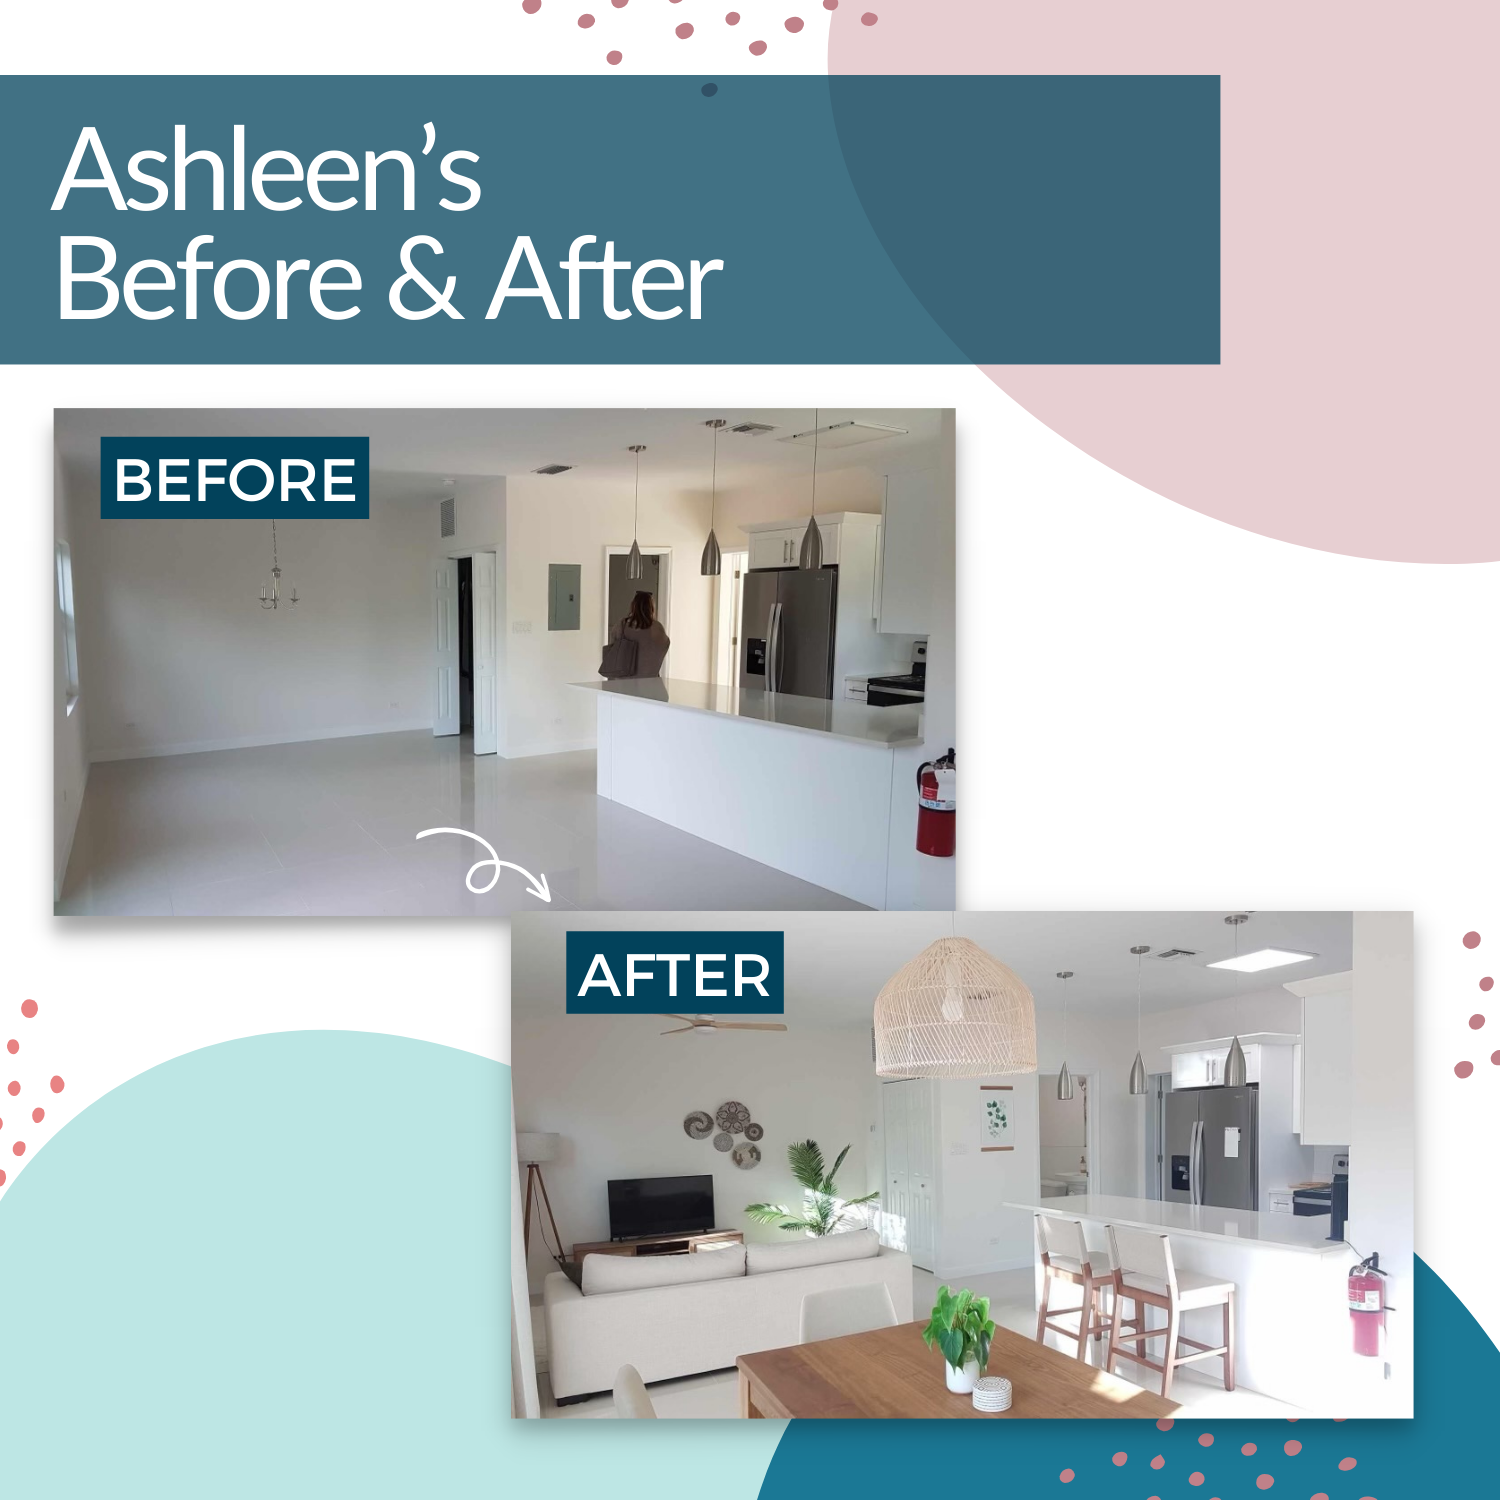 Before and after view of a kitchen-living area transformation. The &